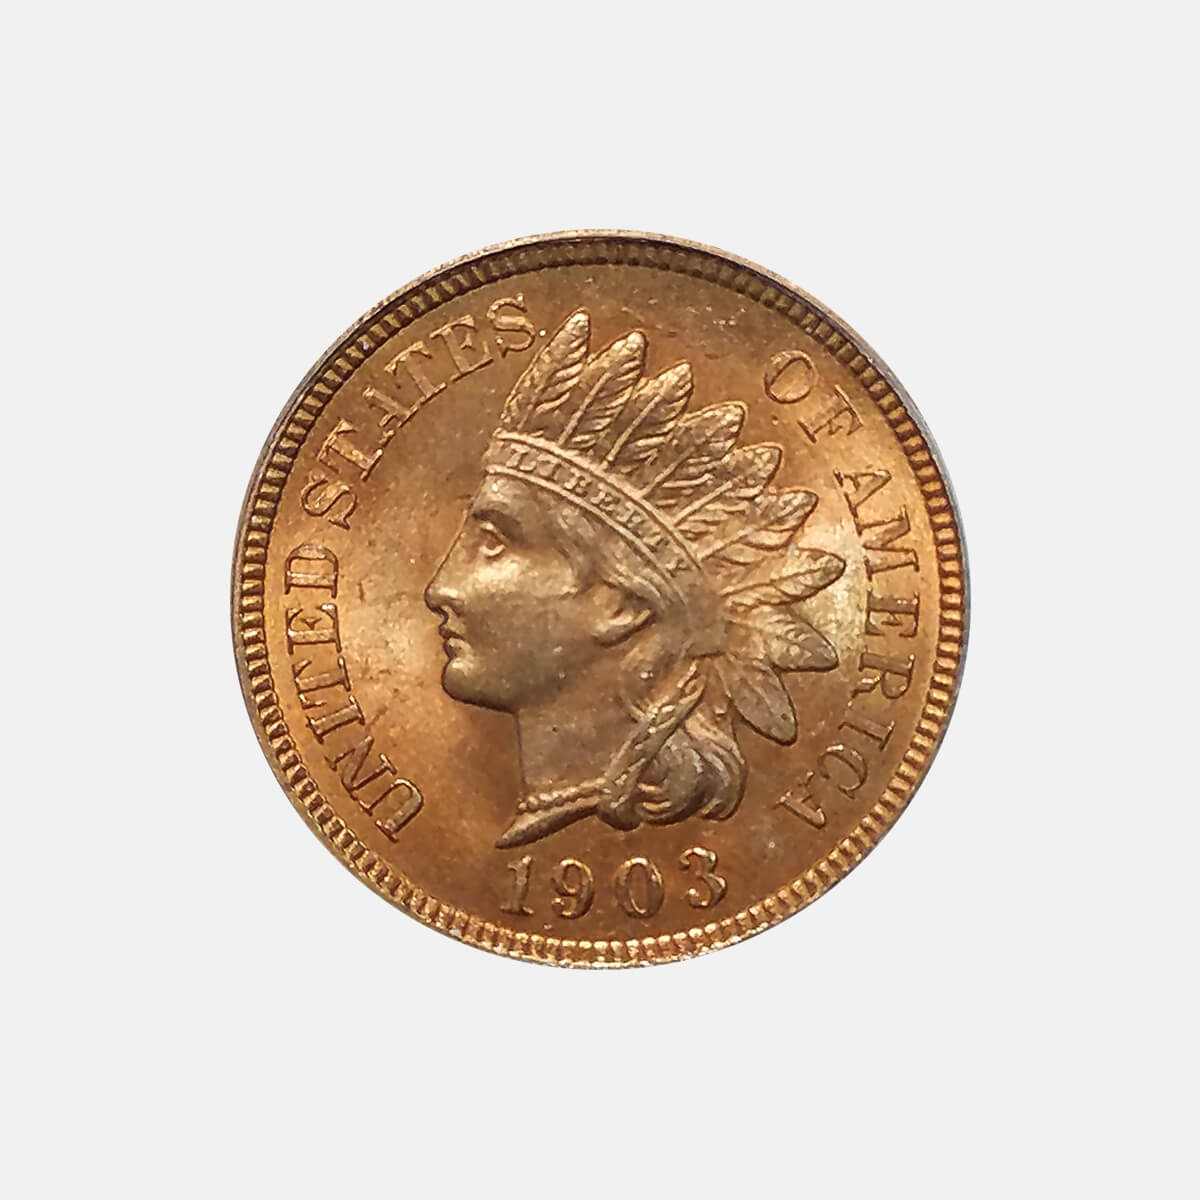 1903 Indian Cent